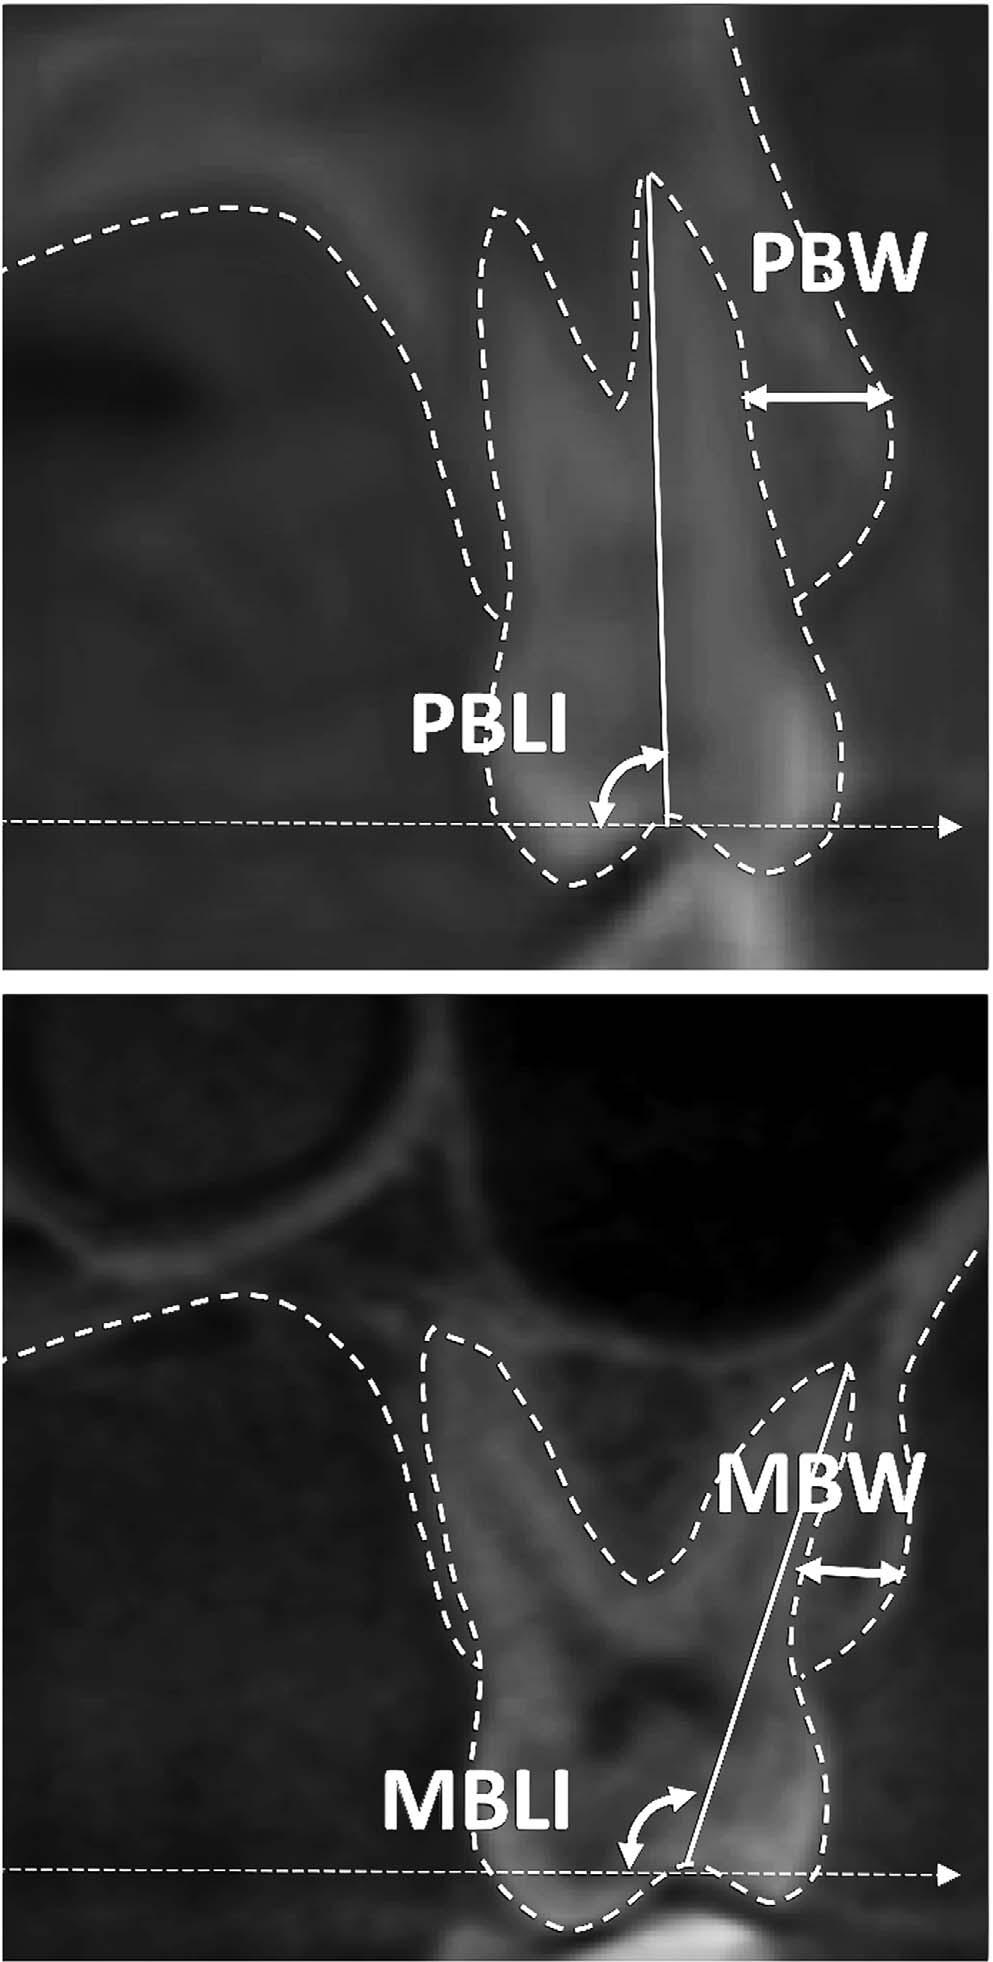 MINISCREW-SUPPORTED RME IN ADOLESCENTS 705 Figure 4. Buccal width measurements obtained at the level of the maxillary first premolar bifurcation (PBW) and maxillary first molar trifurcation (MBW).